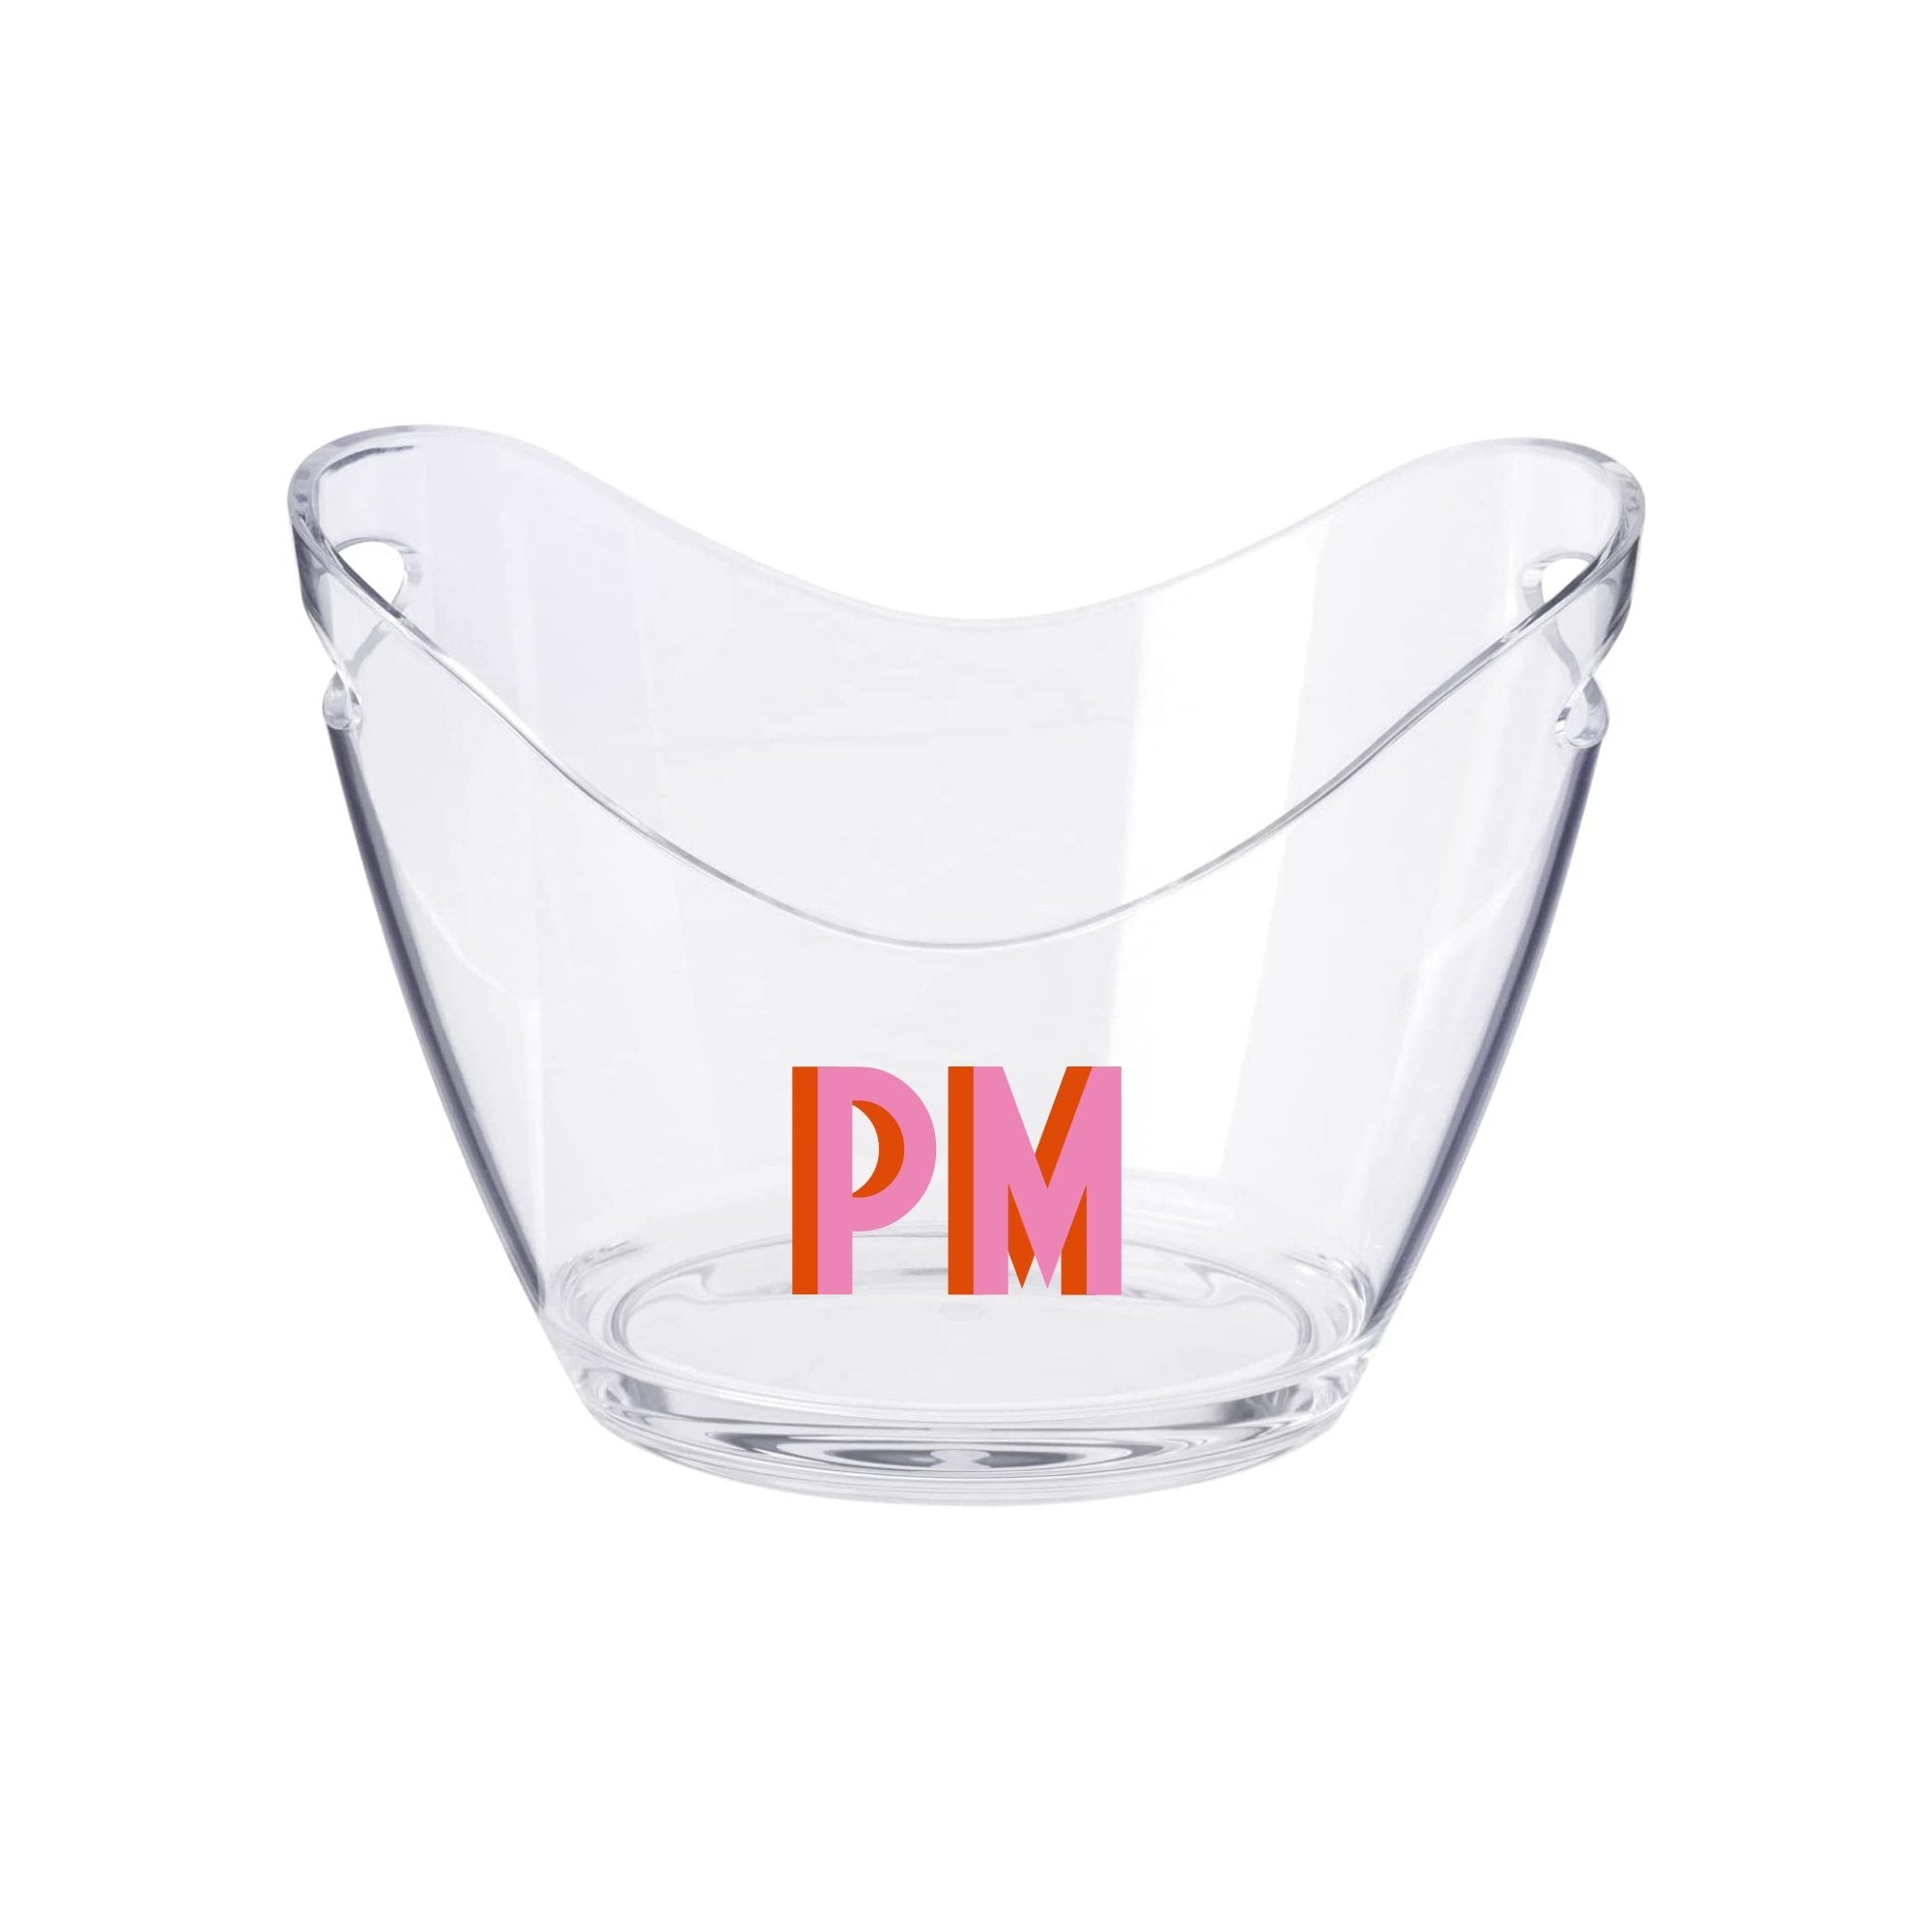 Wide Ice Bucket, Shadow Monogram - Sprinkled With Pink #bachelorette #custom #gifts